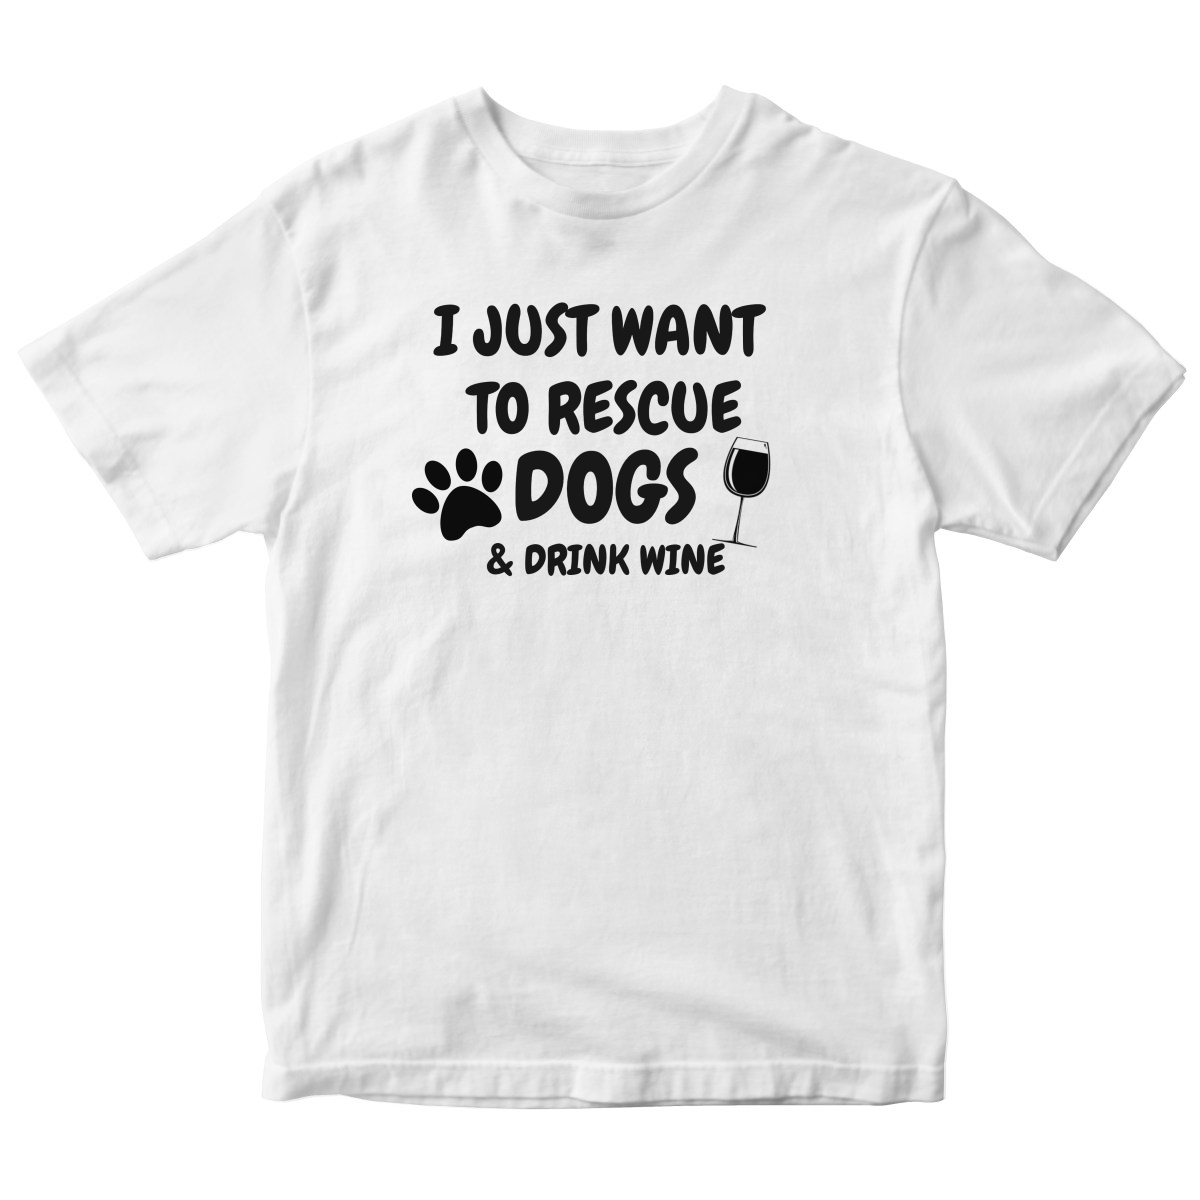 Dogs and Drink Wine Kids T-shirt | White